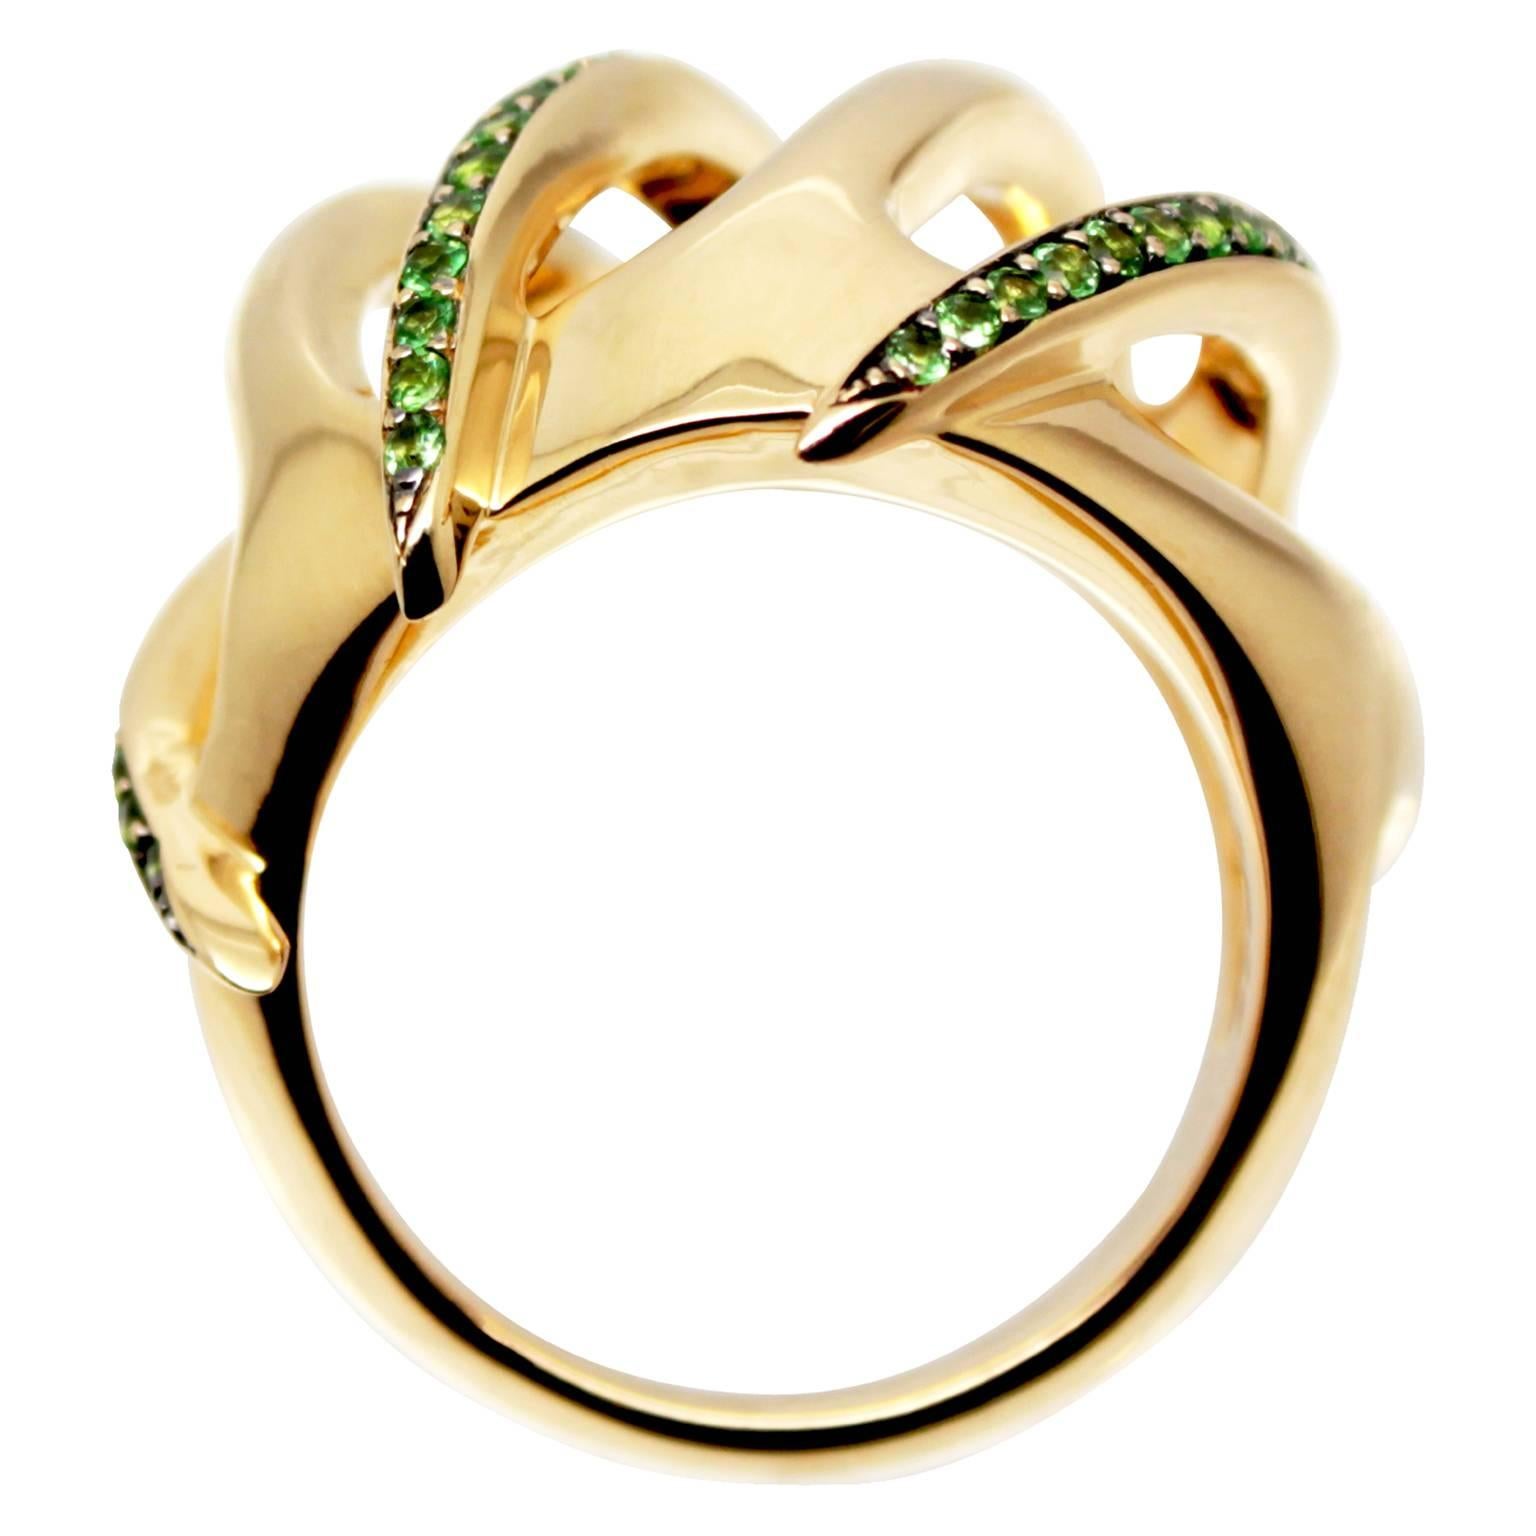 The Venus Flyrtap ring in made in 18ct Yellow Gold with interlocking spines that create an open dome effect. Half of which is  micro pave set with 82 Tsavorite Garnets in size from 0.9mm to 1.5mm with an approximate ct weight of 0.9ct. William has